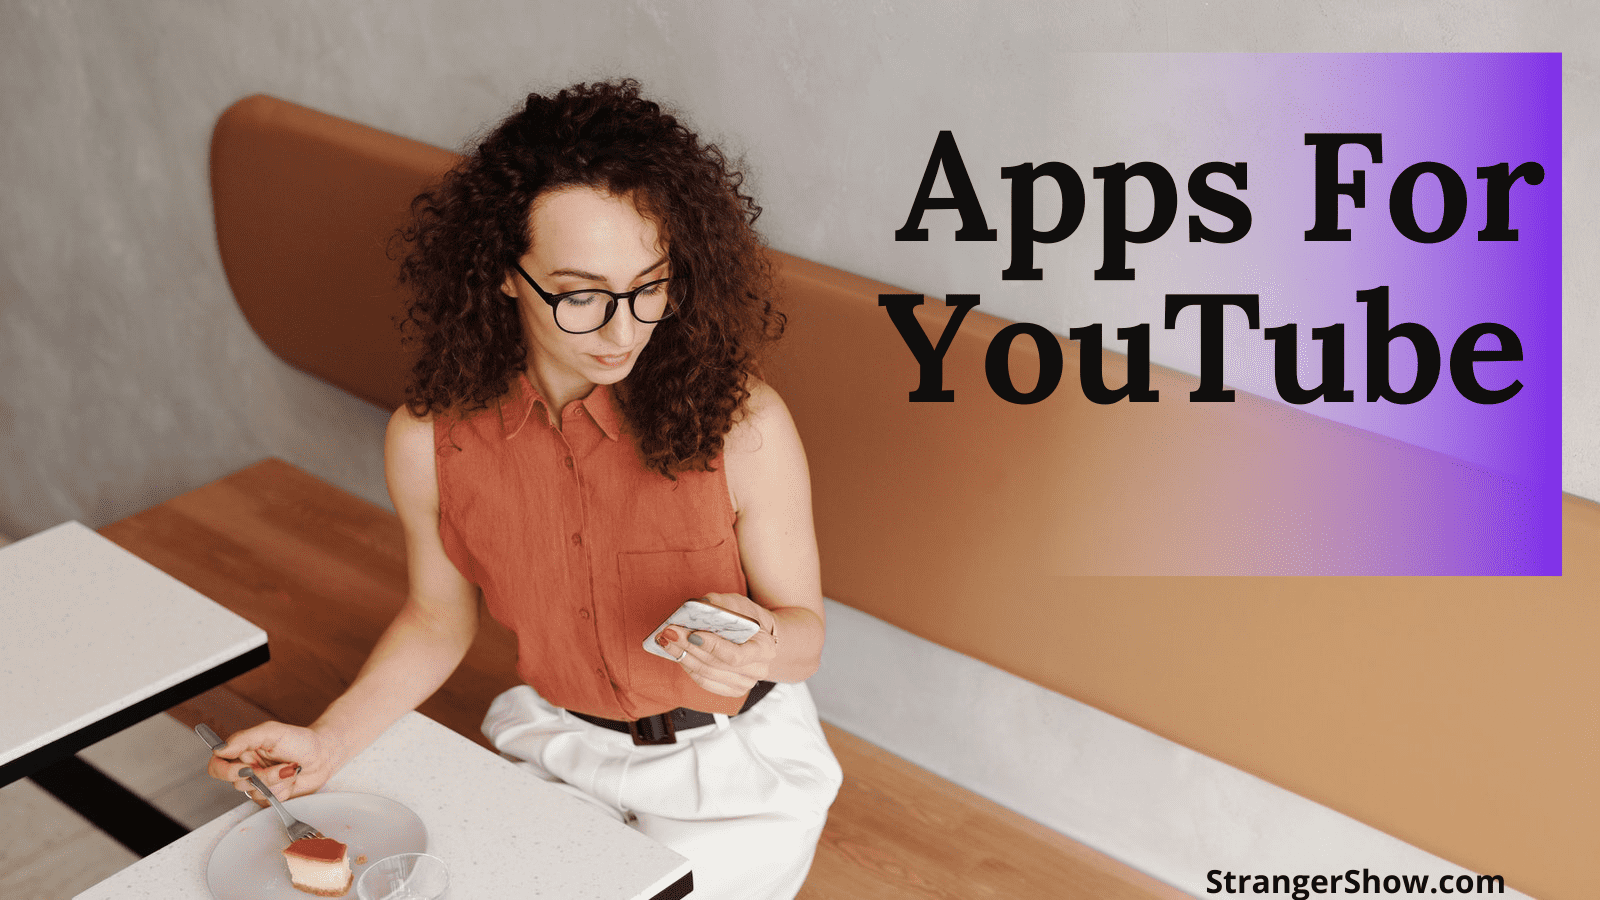 Best apps for YouTube videos android and iOS list